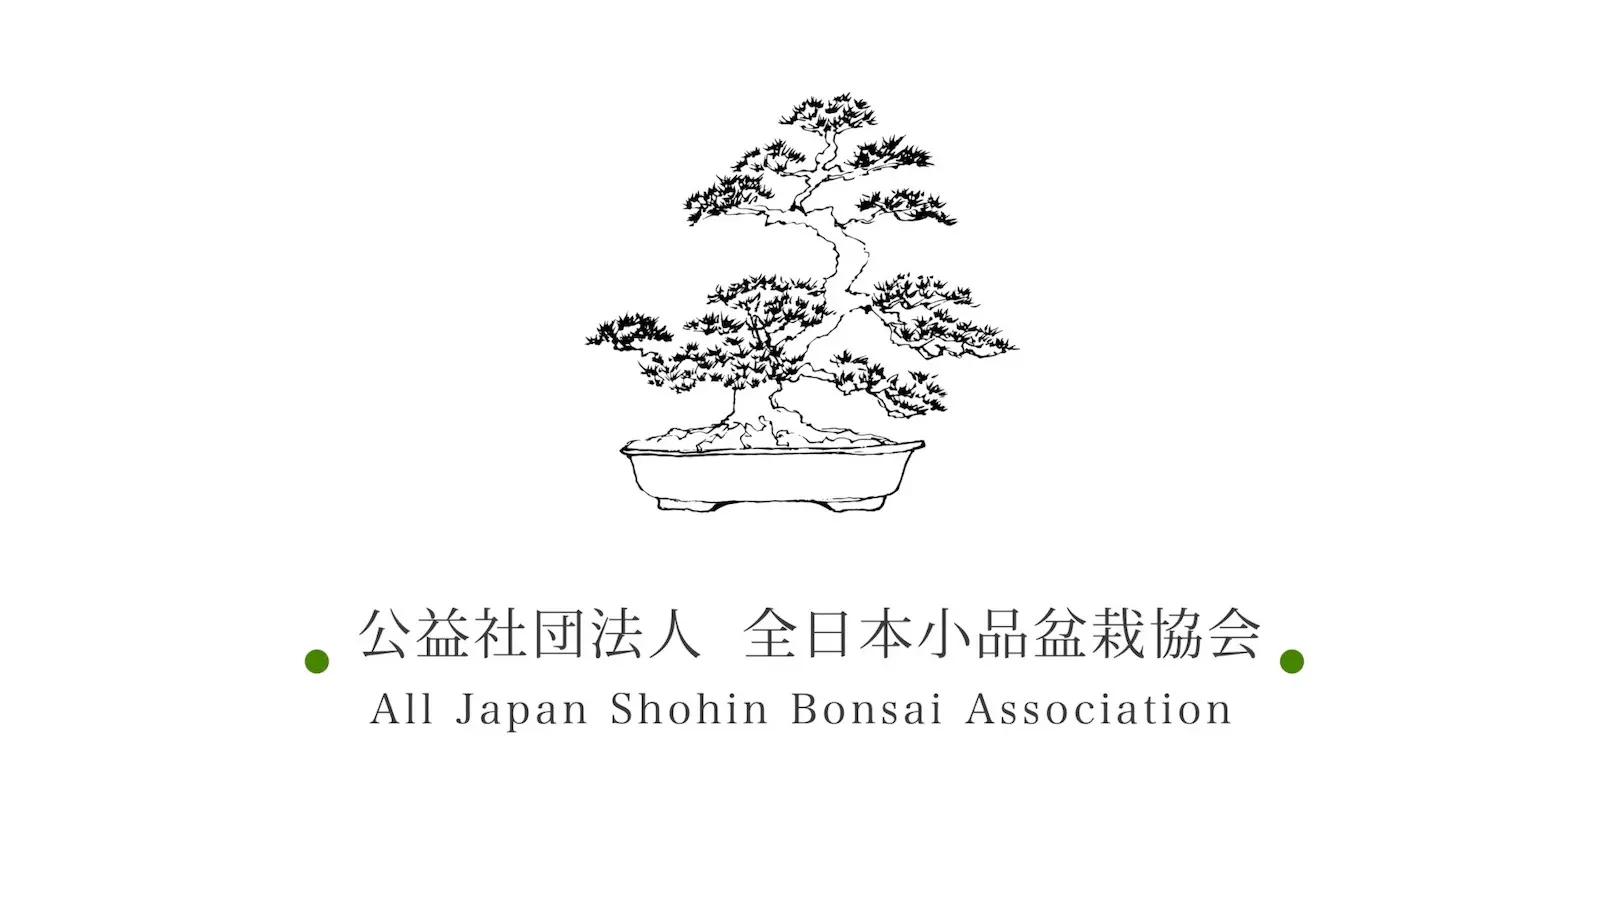 Overview of the 19th Modern Small Bonsai Potters’ Work Exhibition